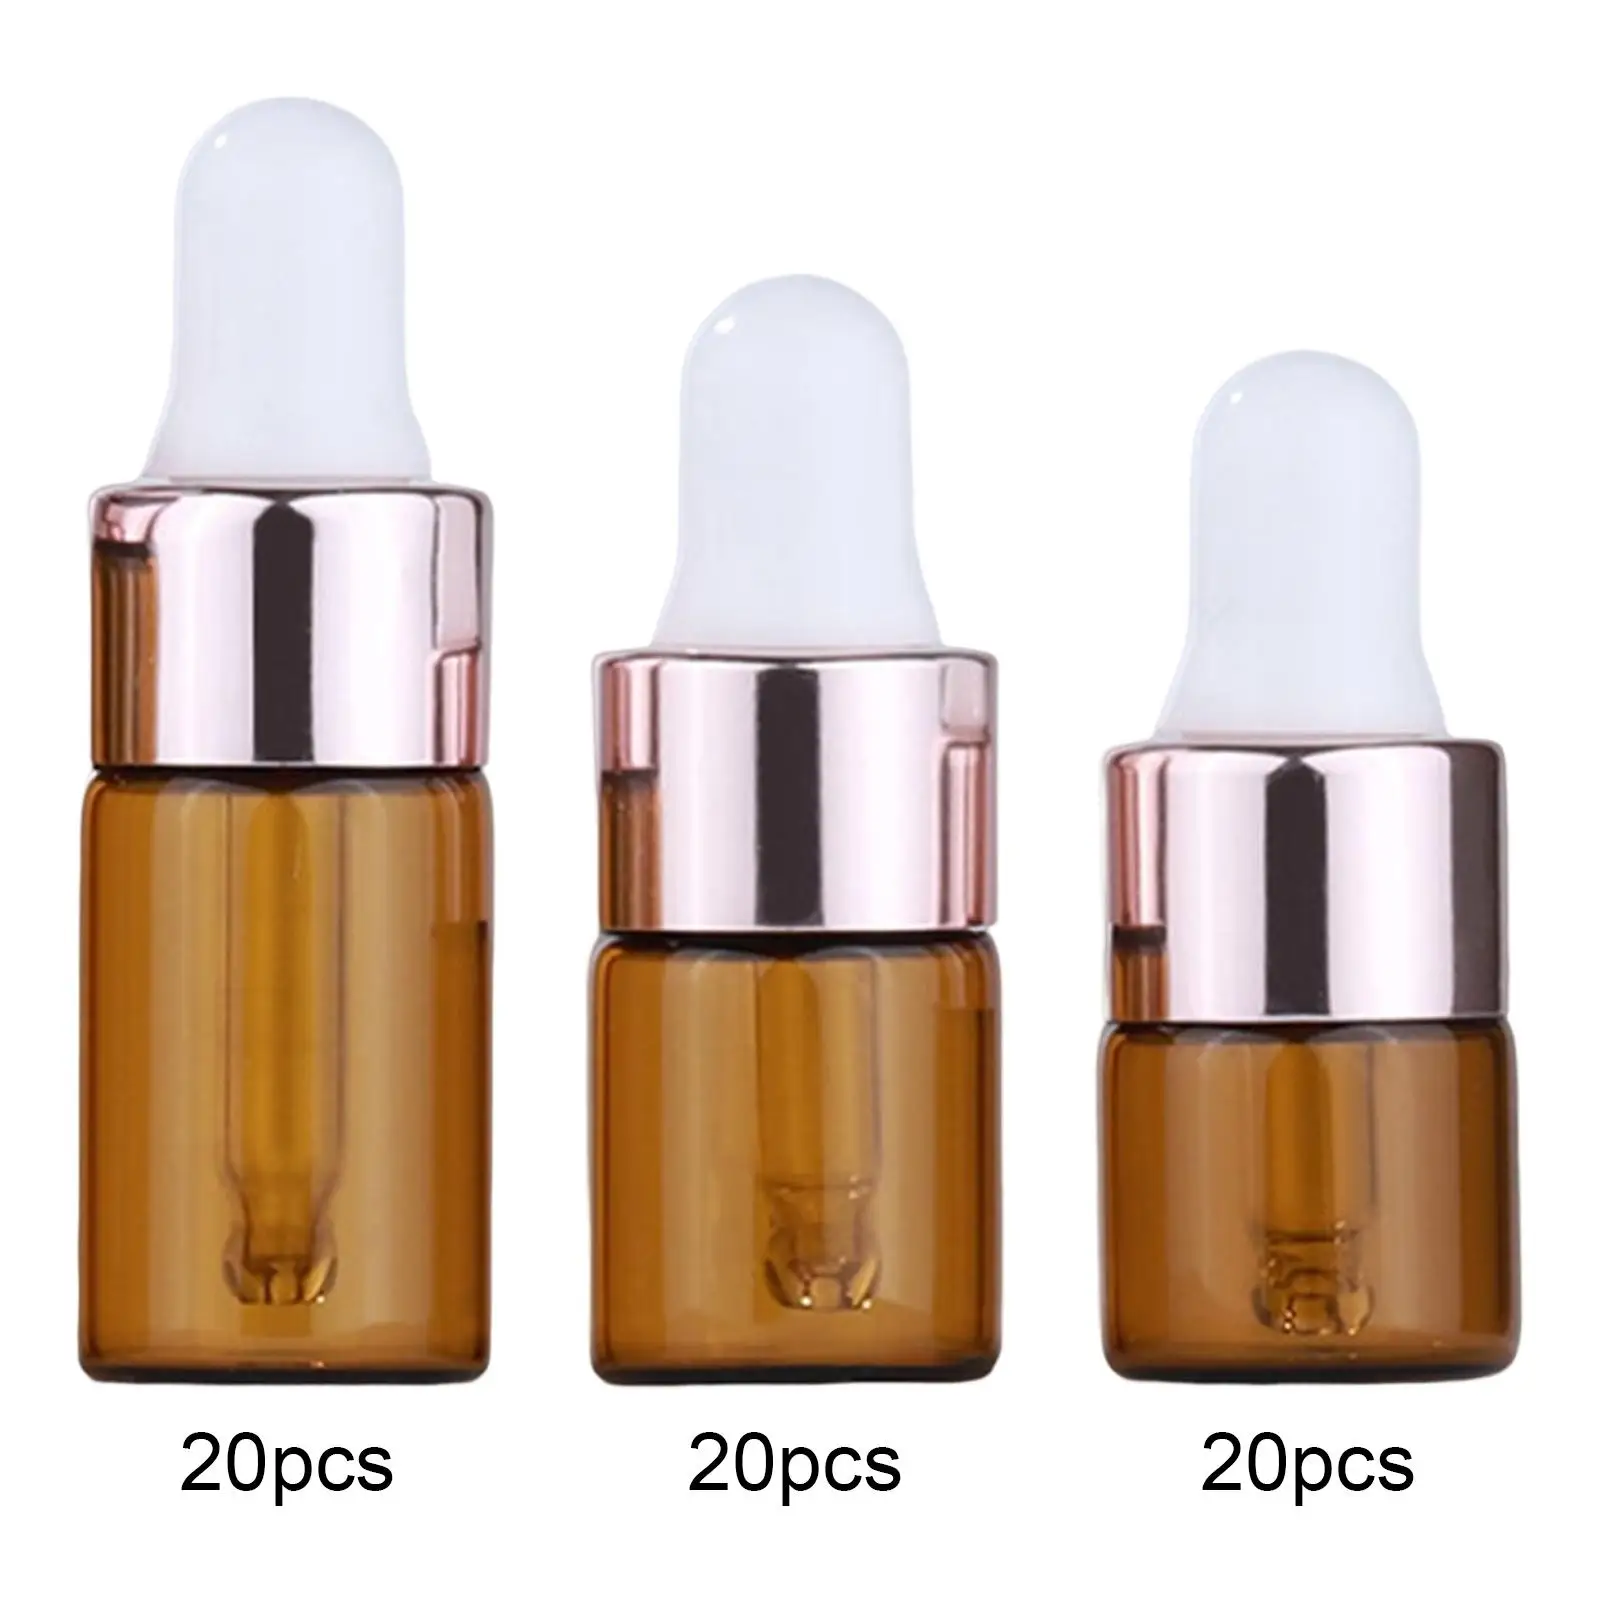 20Pcs Mini Empty Essential Oil Dropper Bottles Vials Leakproof with Eye Droppers for Perfume Hair Oil Cosmetic Body Oils Sample